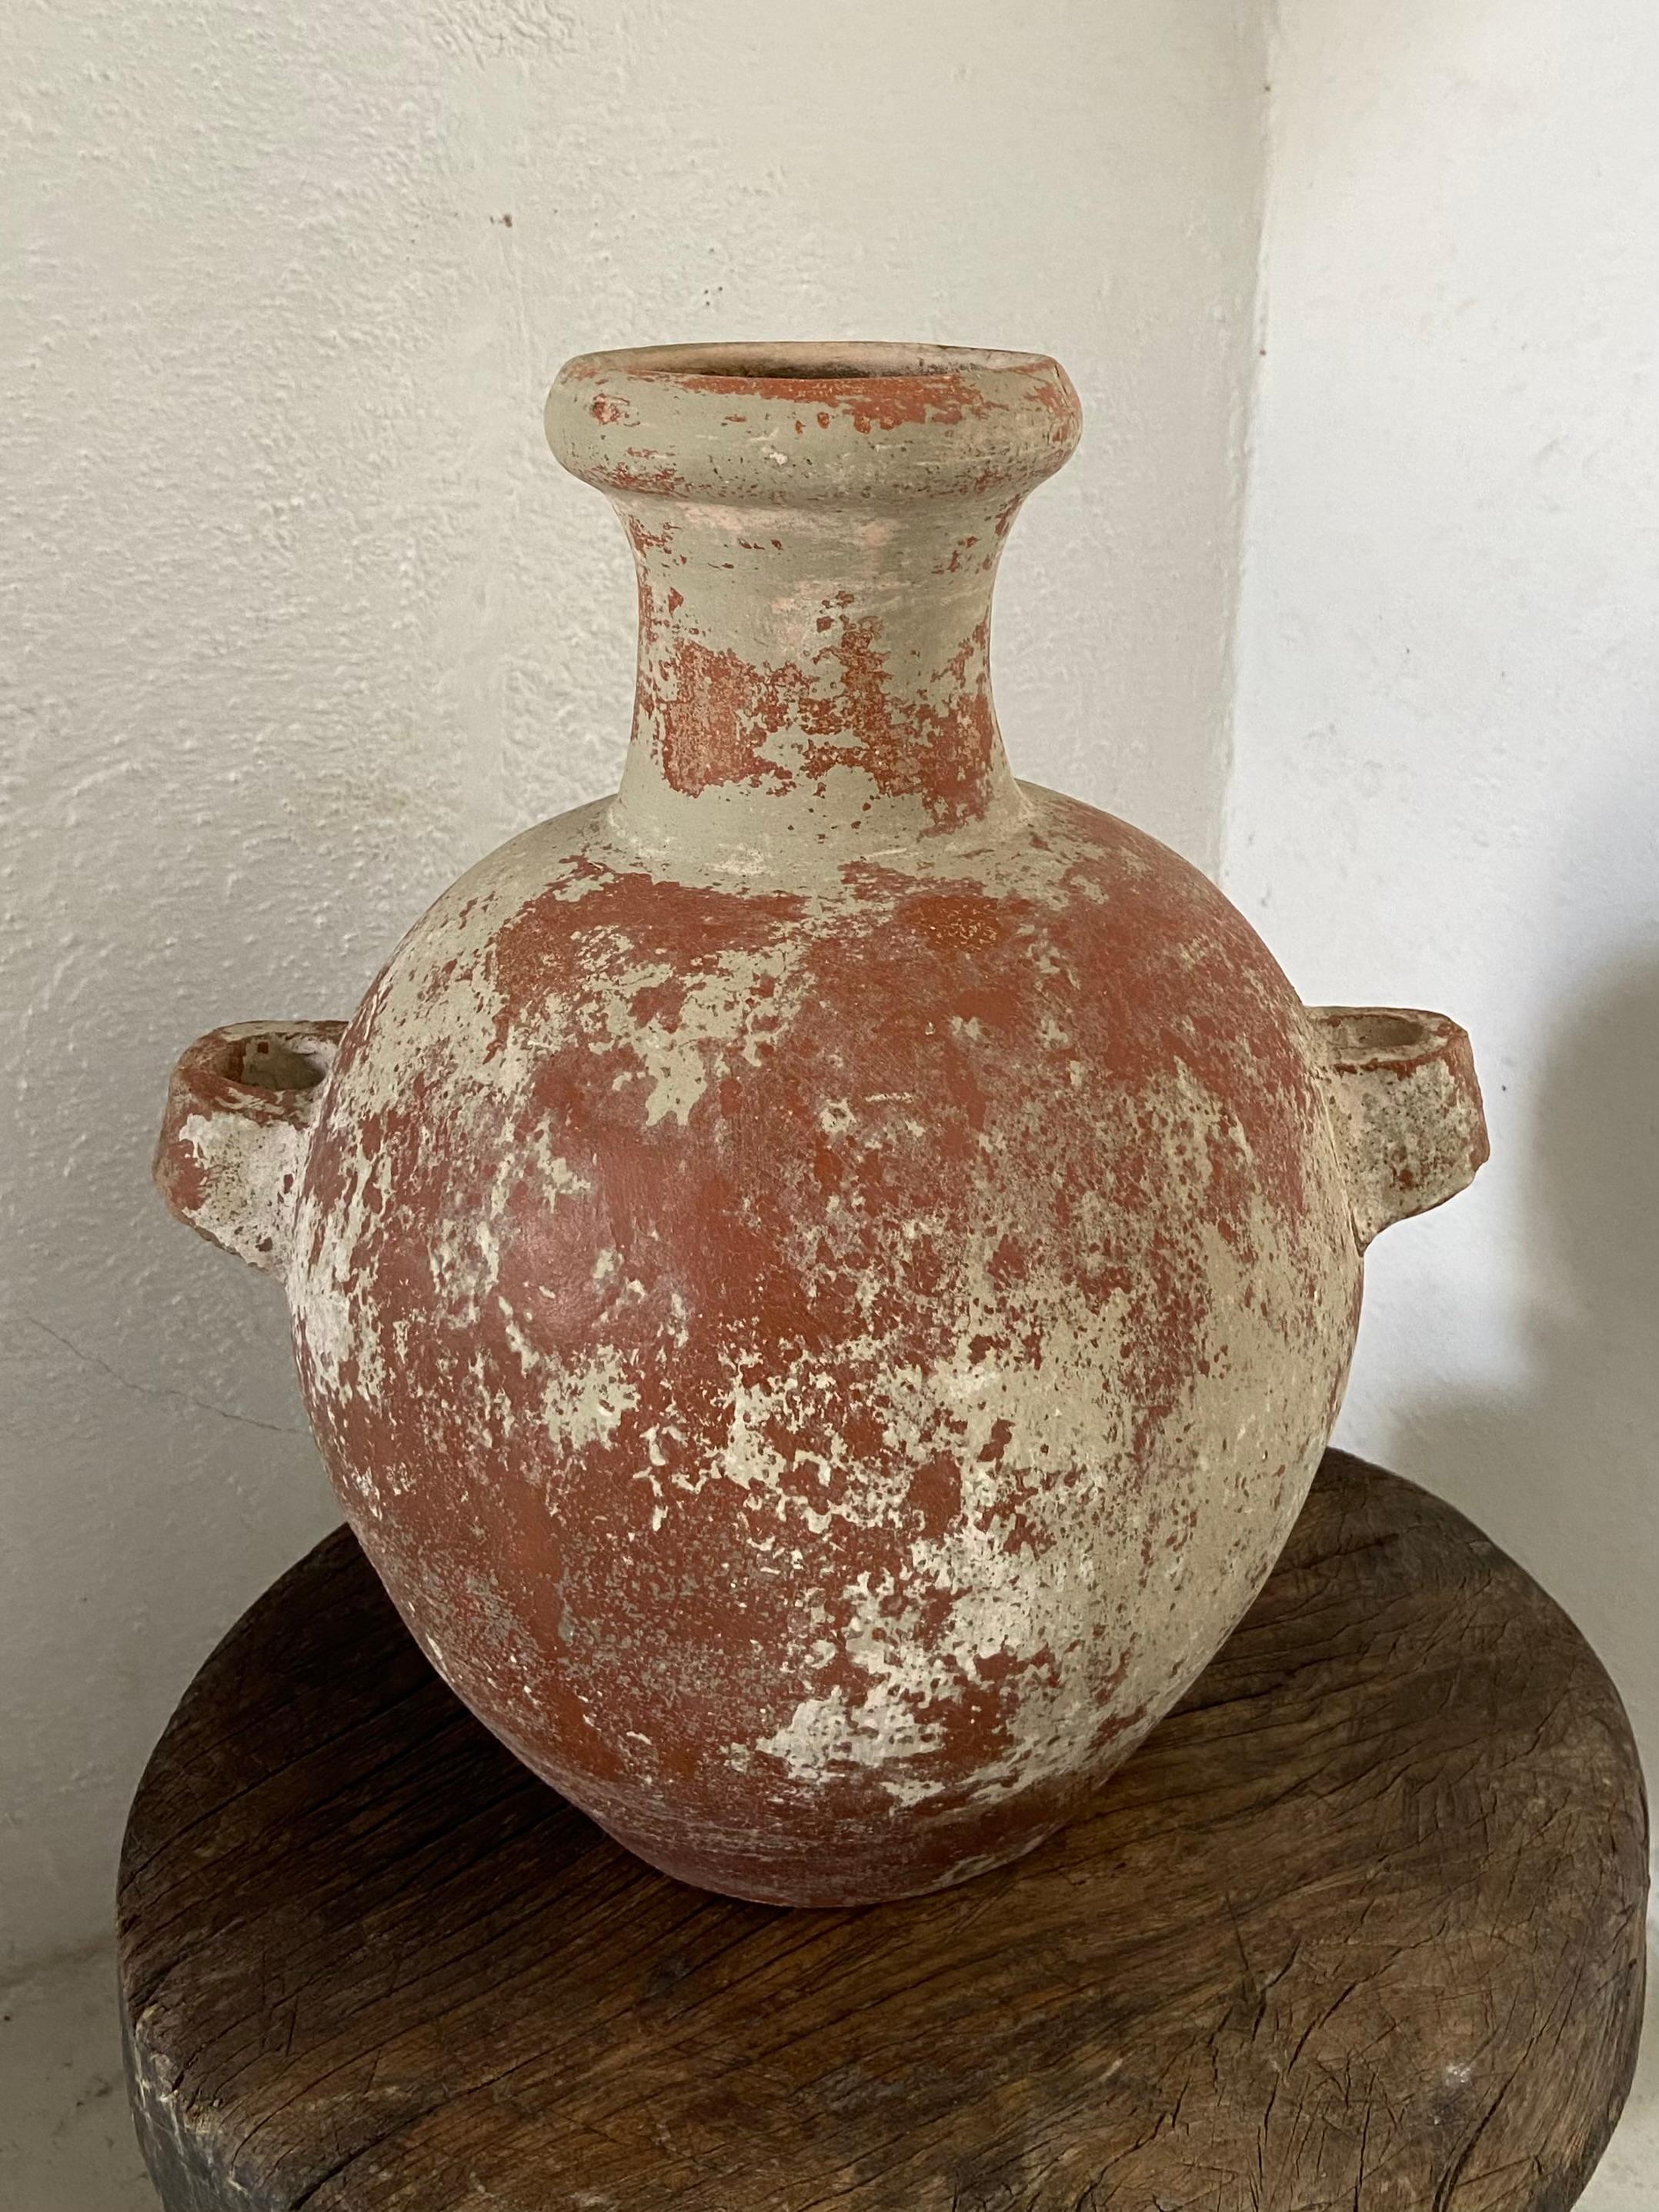 Primitive Water Vessel by Artefakto
Unique piece.
Dimensions: Ø 31 x H 35 cm.
Materials: Terracotta. 

Central Yucatan, Mexico. Early 1900s.

Artefakto opened its doors on the Riviera Nayarit coastline in 2010. With an unrelenting passion for